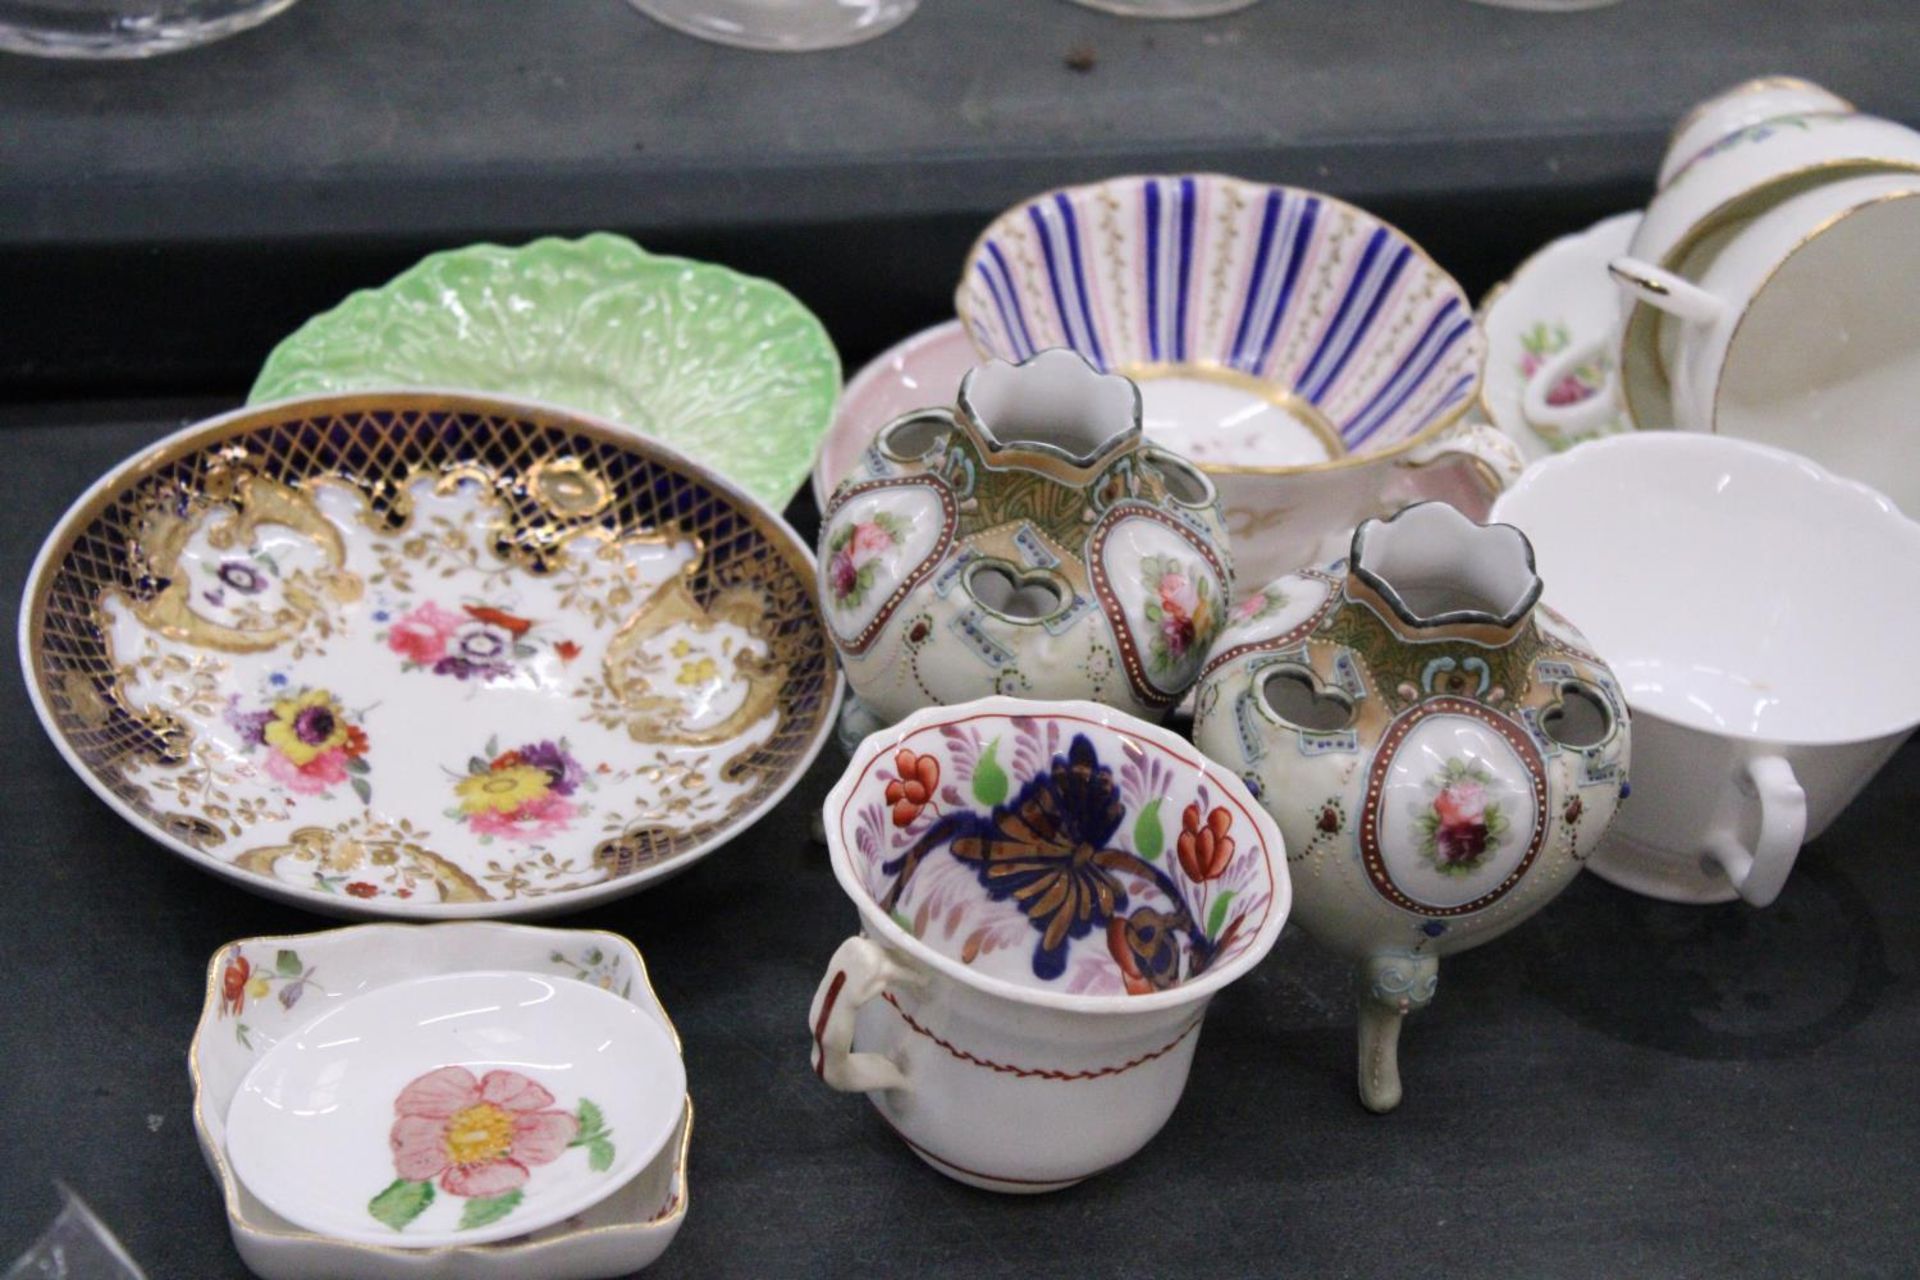 A FOLEY CHINA PART TEASET TO INCLUDE A CAKE PLATE, A CREAM JUG, SUGAR BOWL, CUPS, SAUCERS AND SIDE - Image 5 of 6